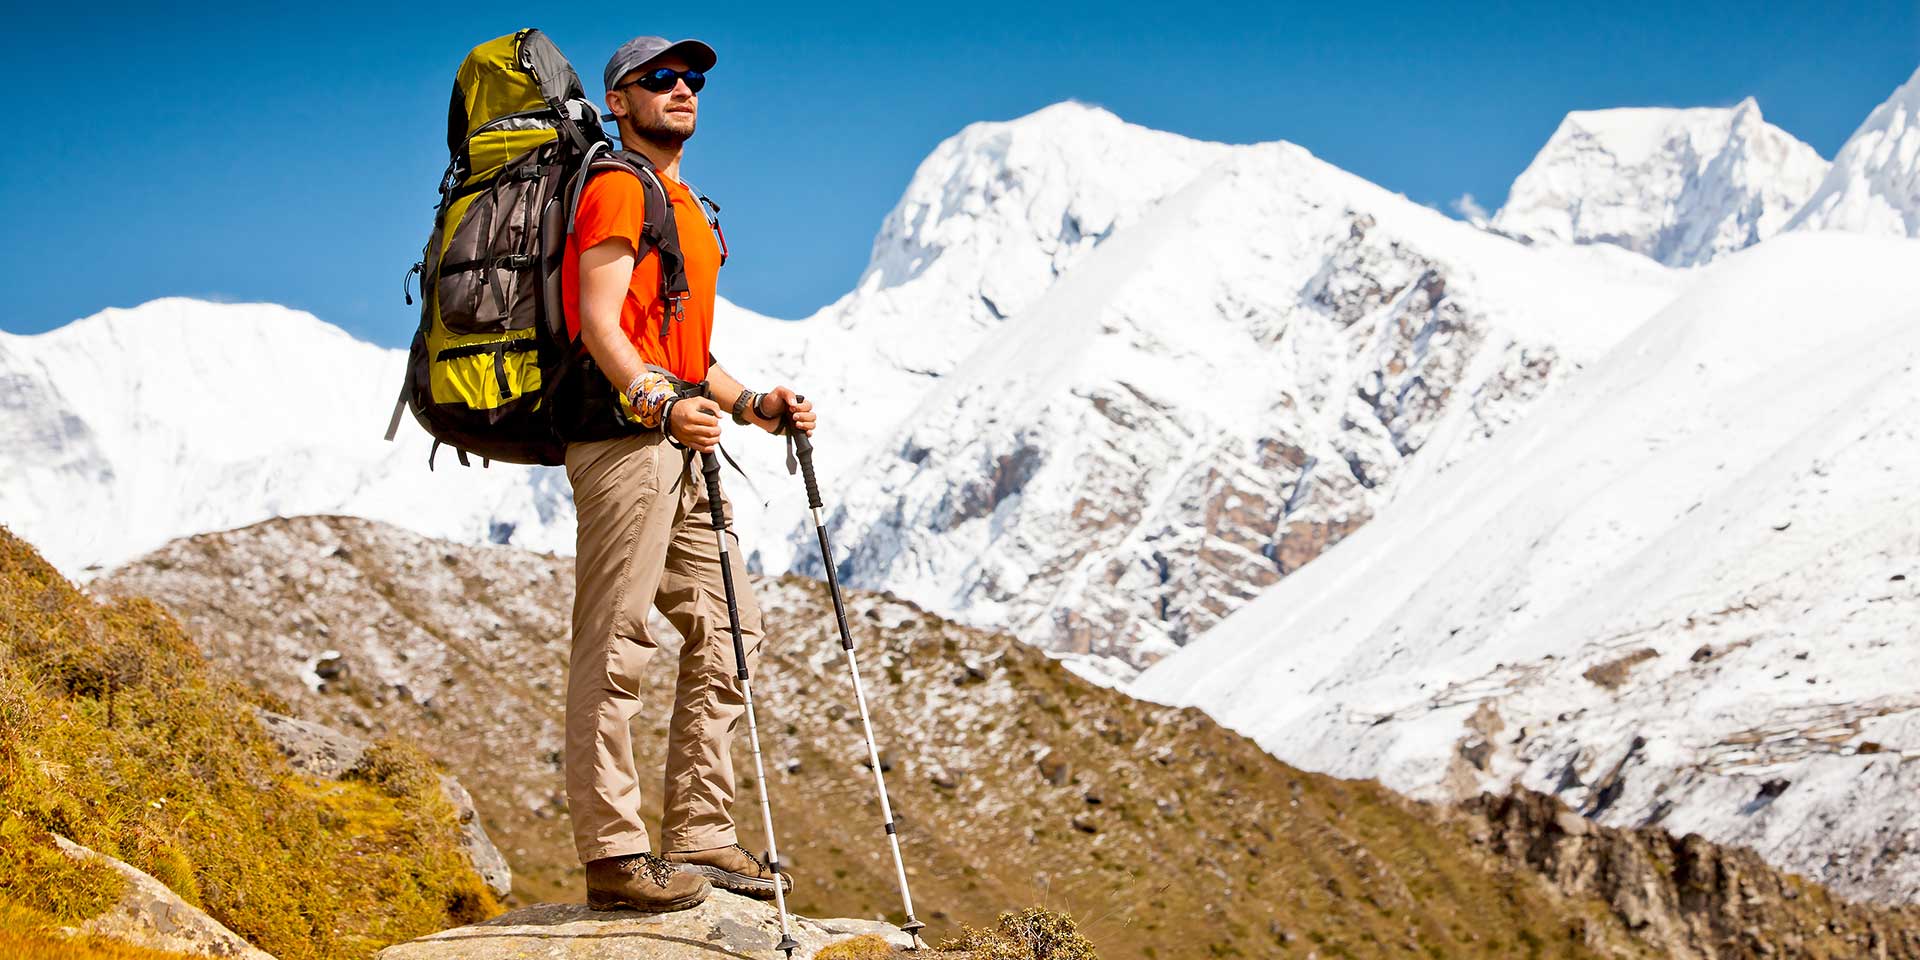 How to choose hiking pants: for any type of adventure